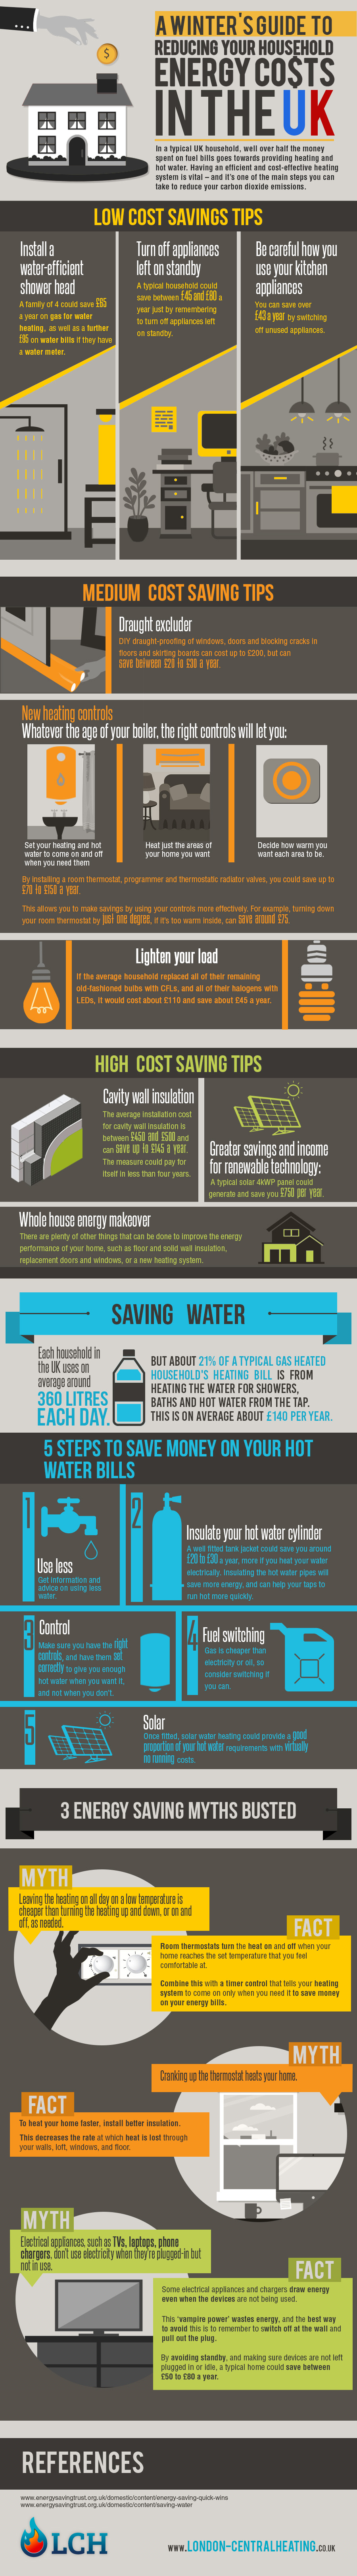 Reduce Household Energy Costs in the UK